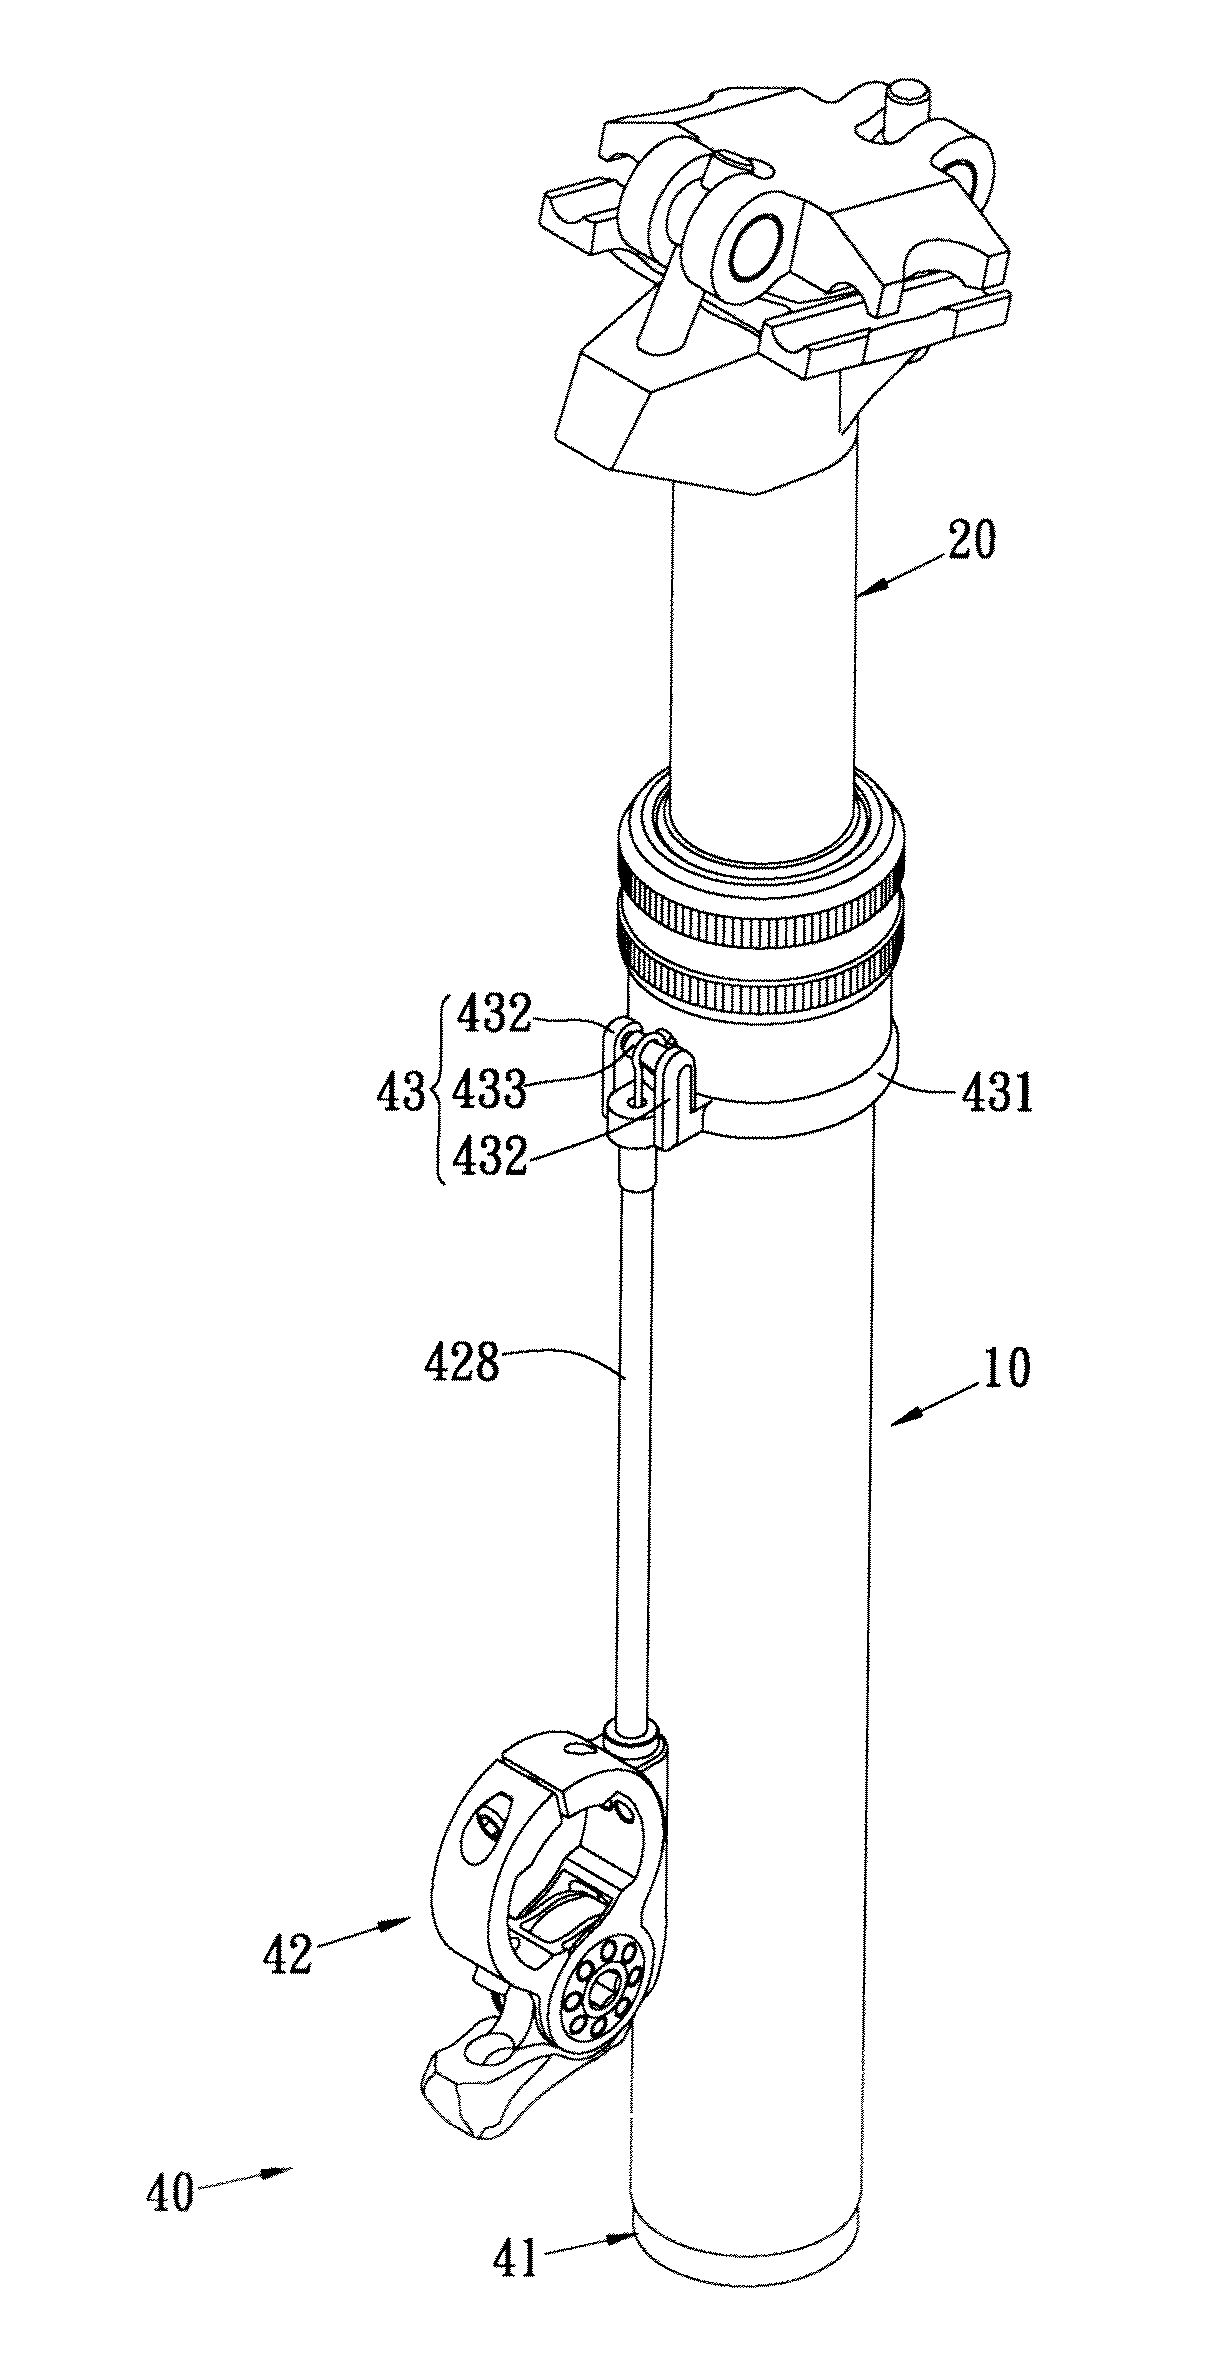 Control device for adjustable bicycle seat